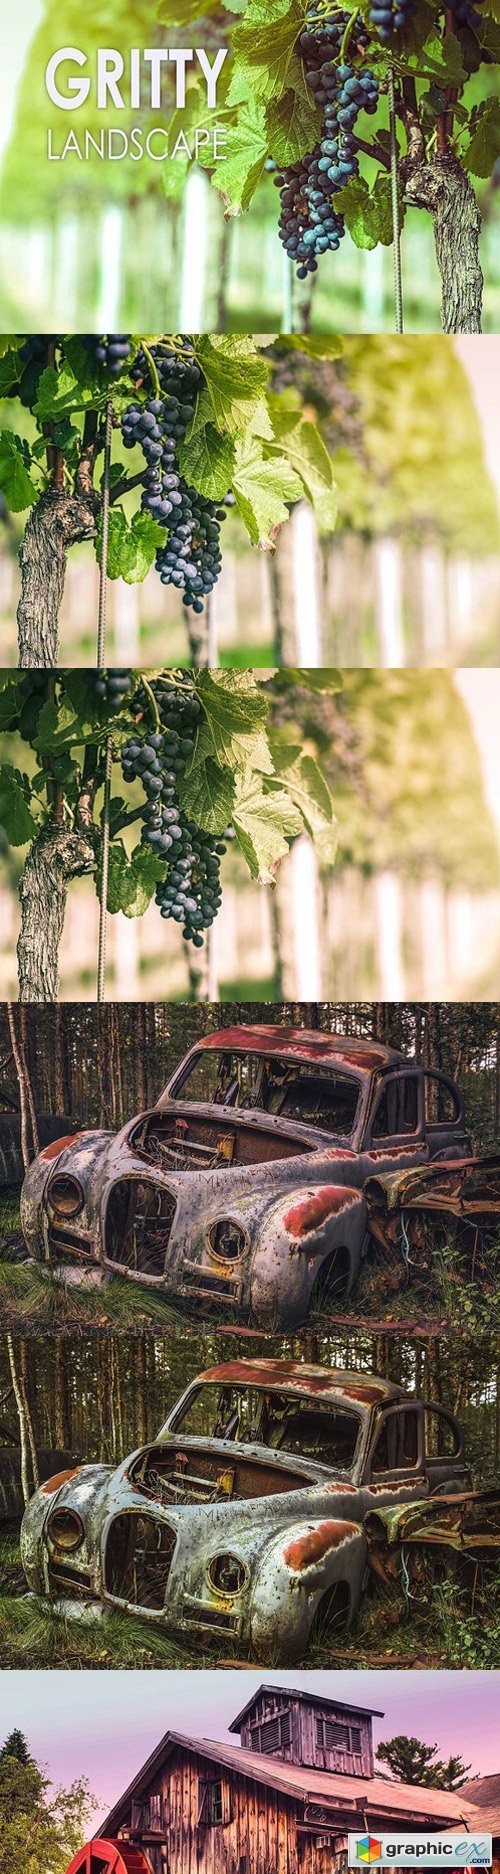 11 Gritty Landscape Presets